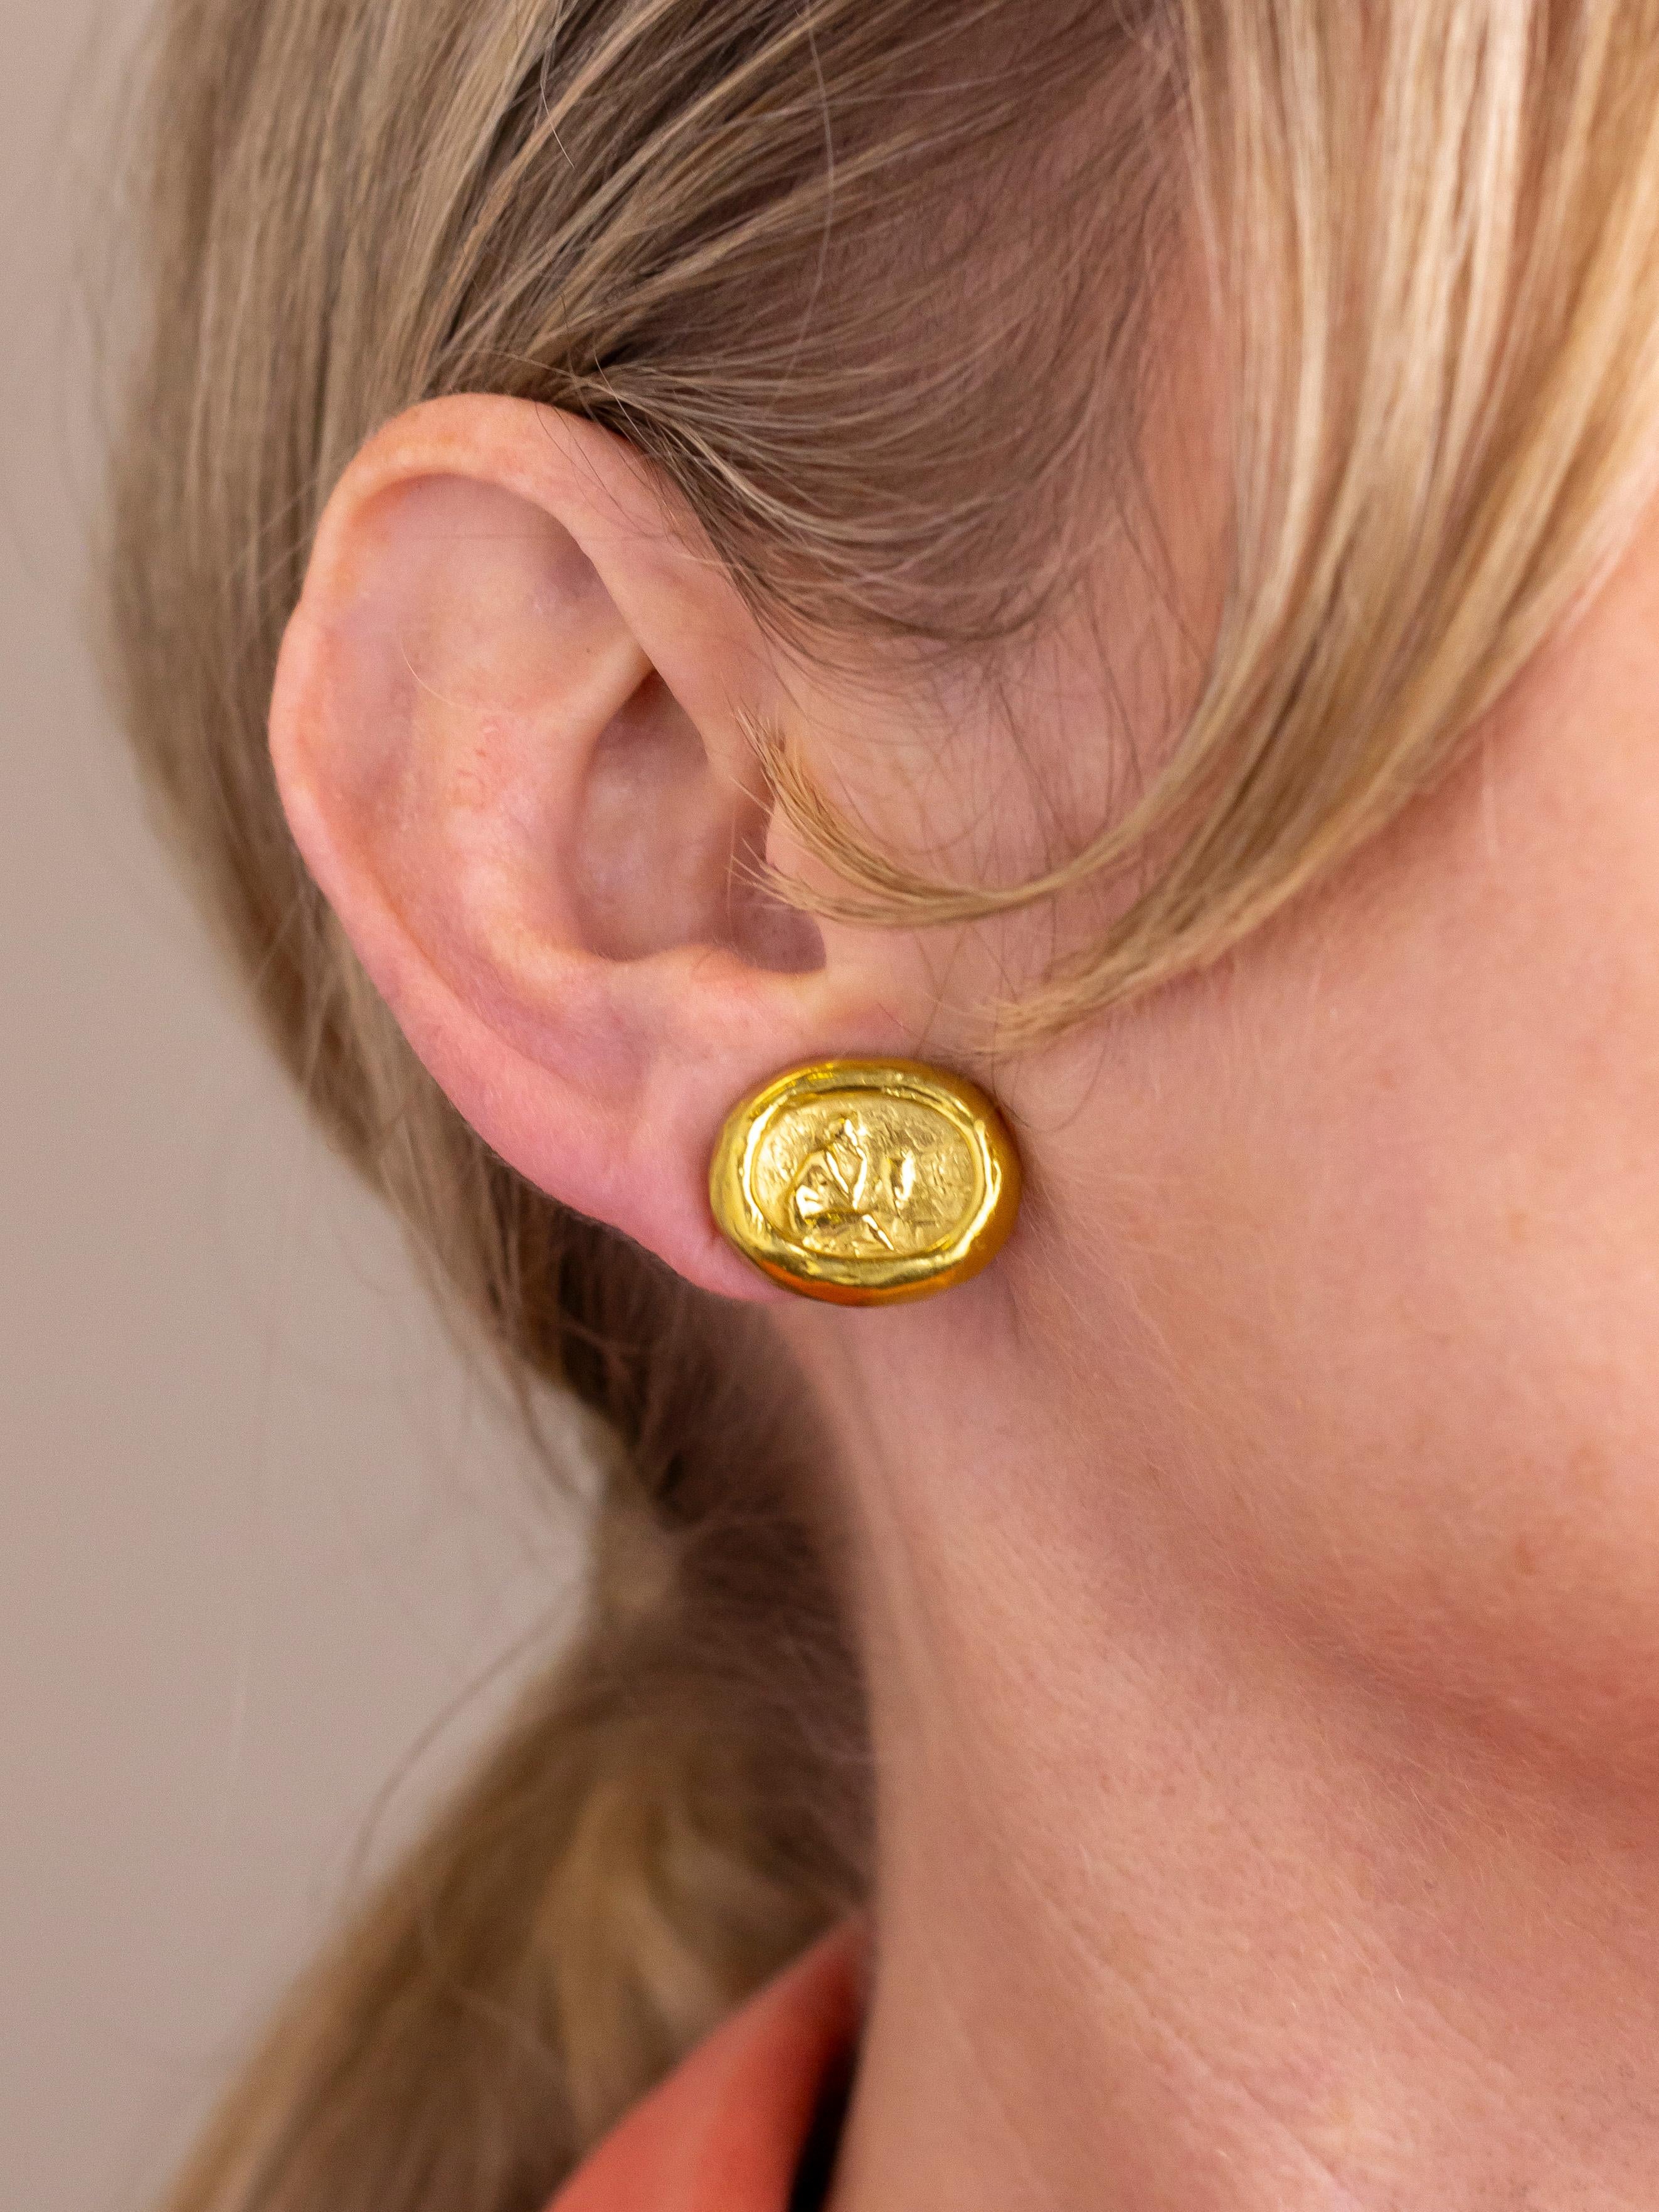 This pair of buttery 18 karat yellow gold ear clips were manufactured by American jeweller, Seidengang. The firm was founded by two women, Carol Seiden and Carolyn Gang who combined their surnames for the title of the company. Often referencing